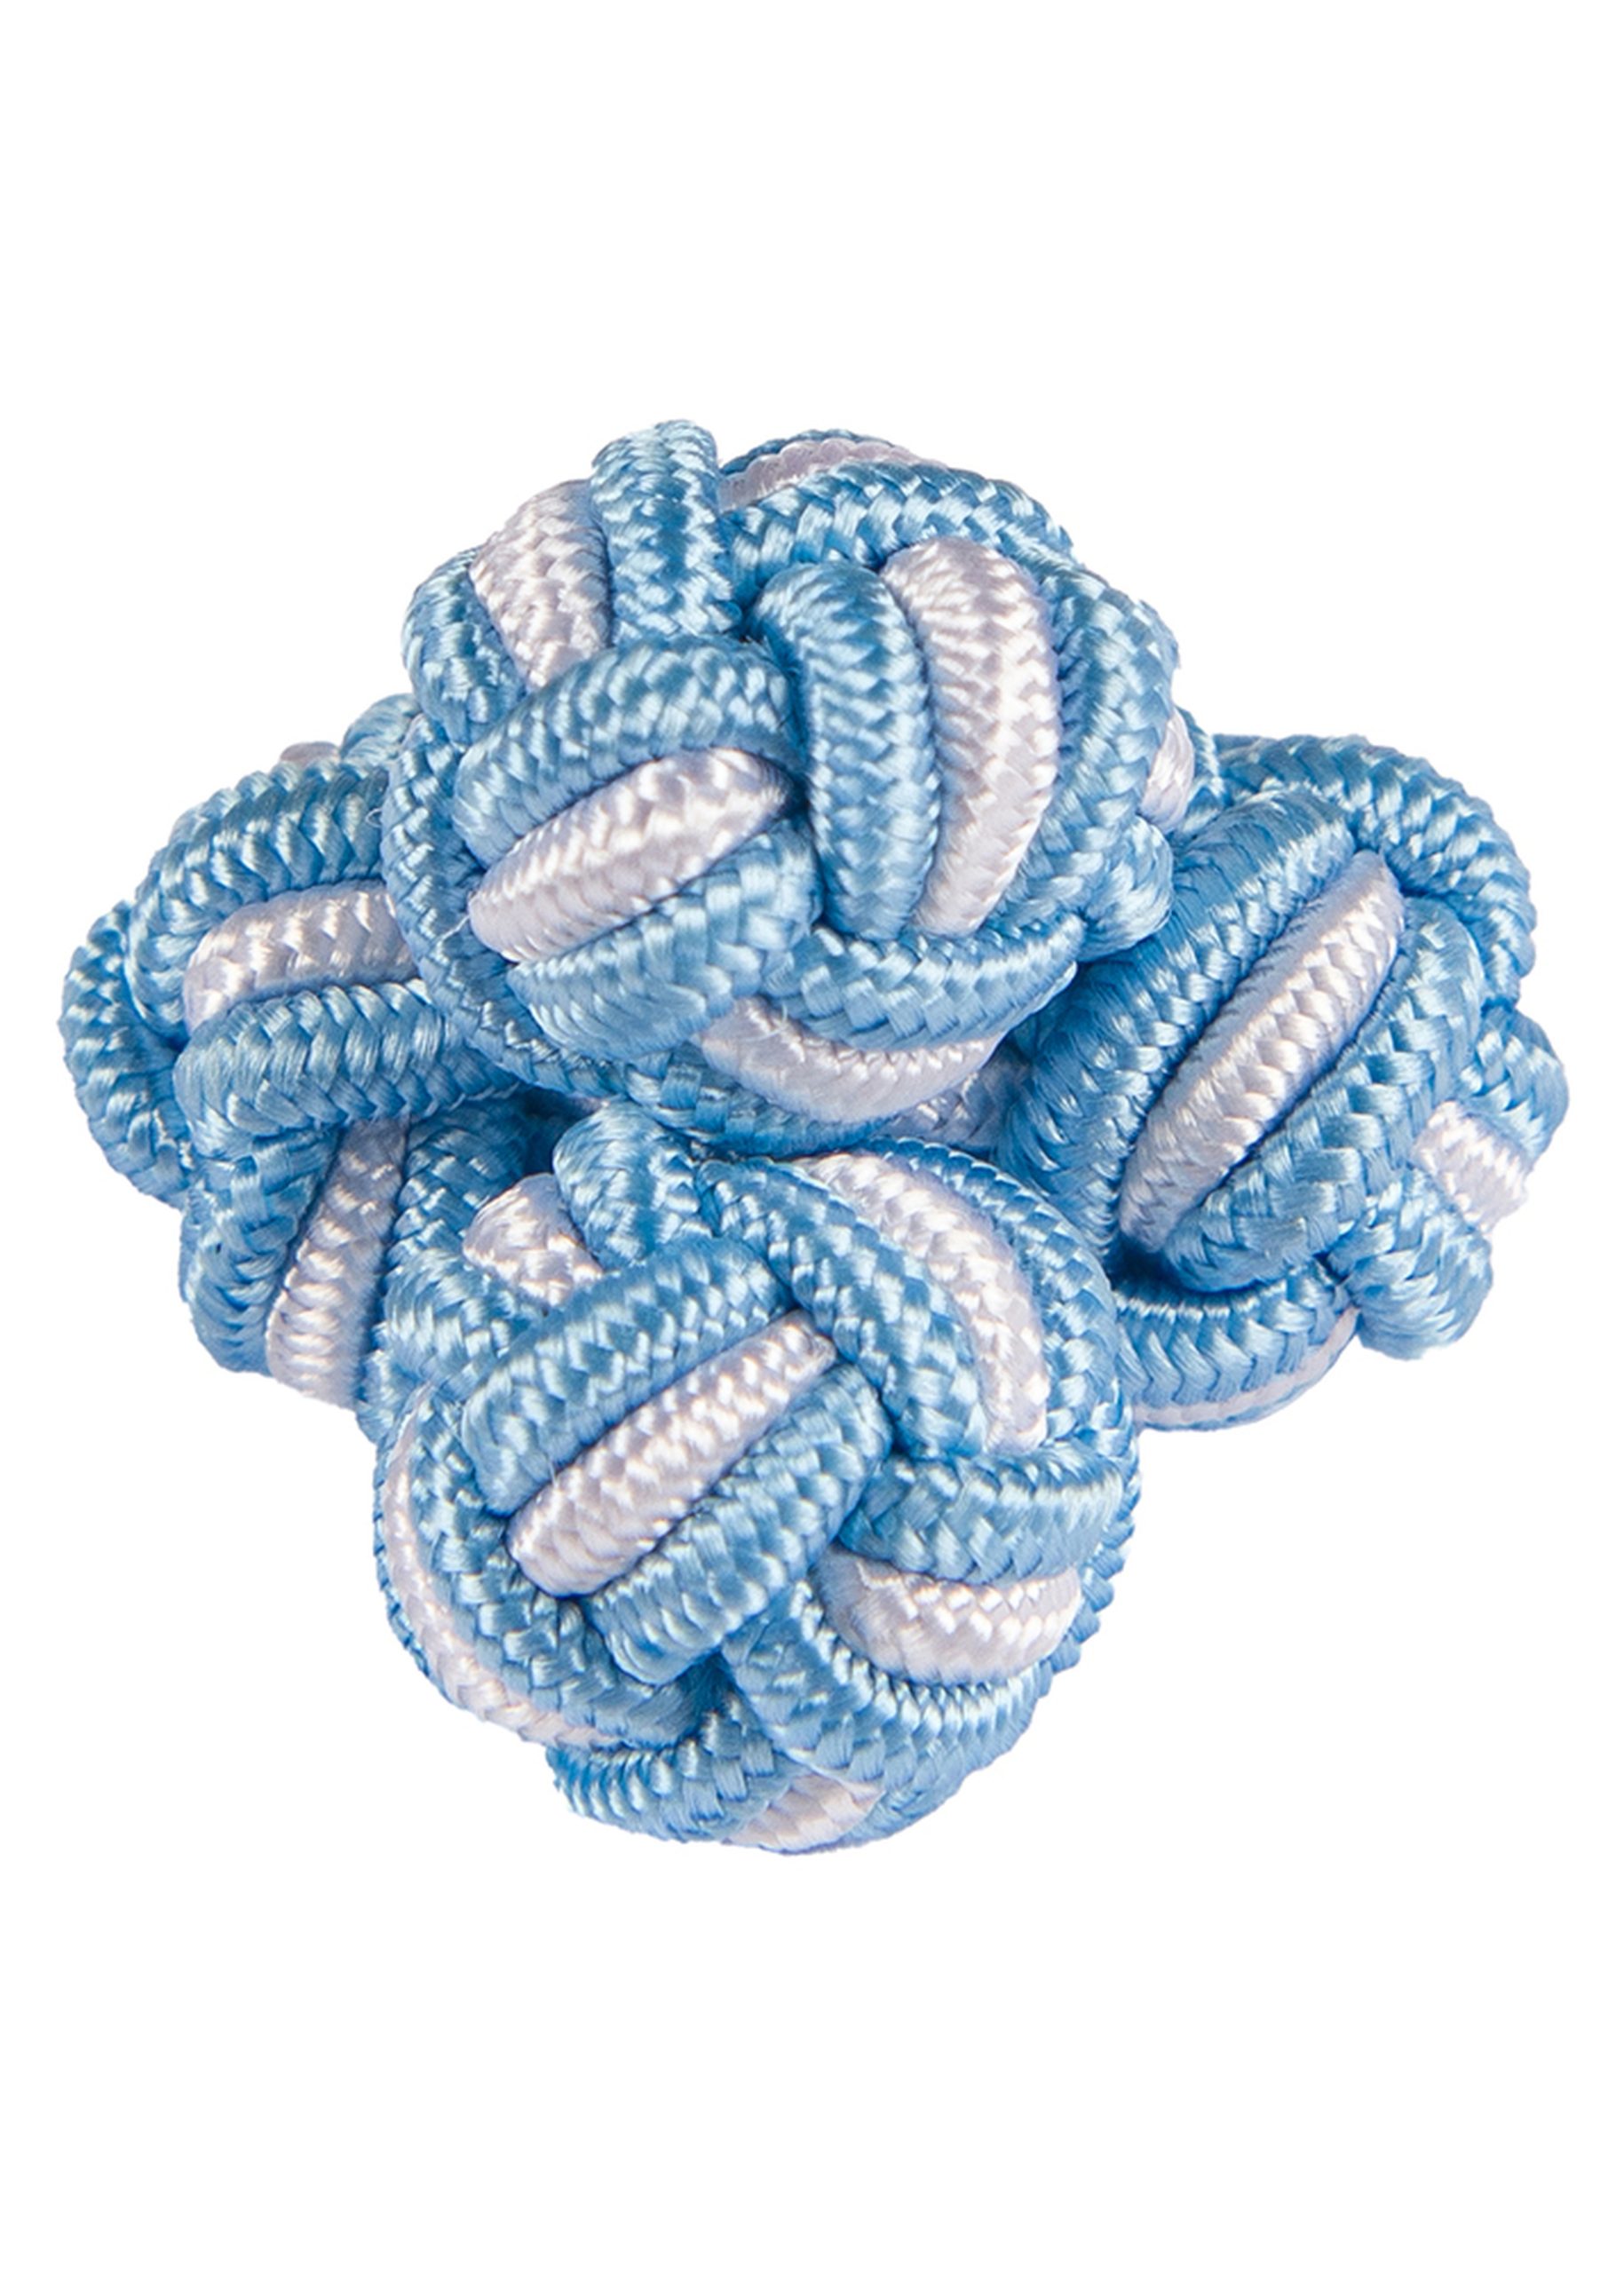 Roderick Charles silk knot in blue and white stripes